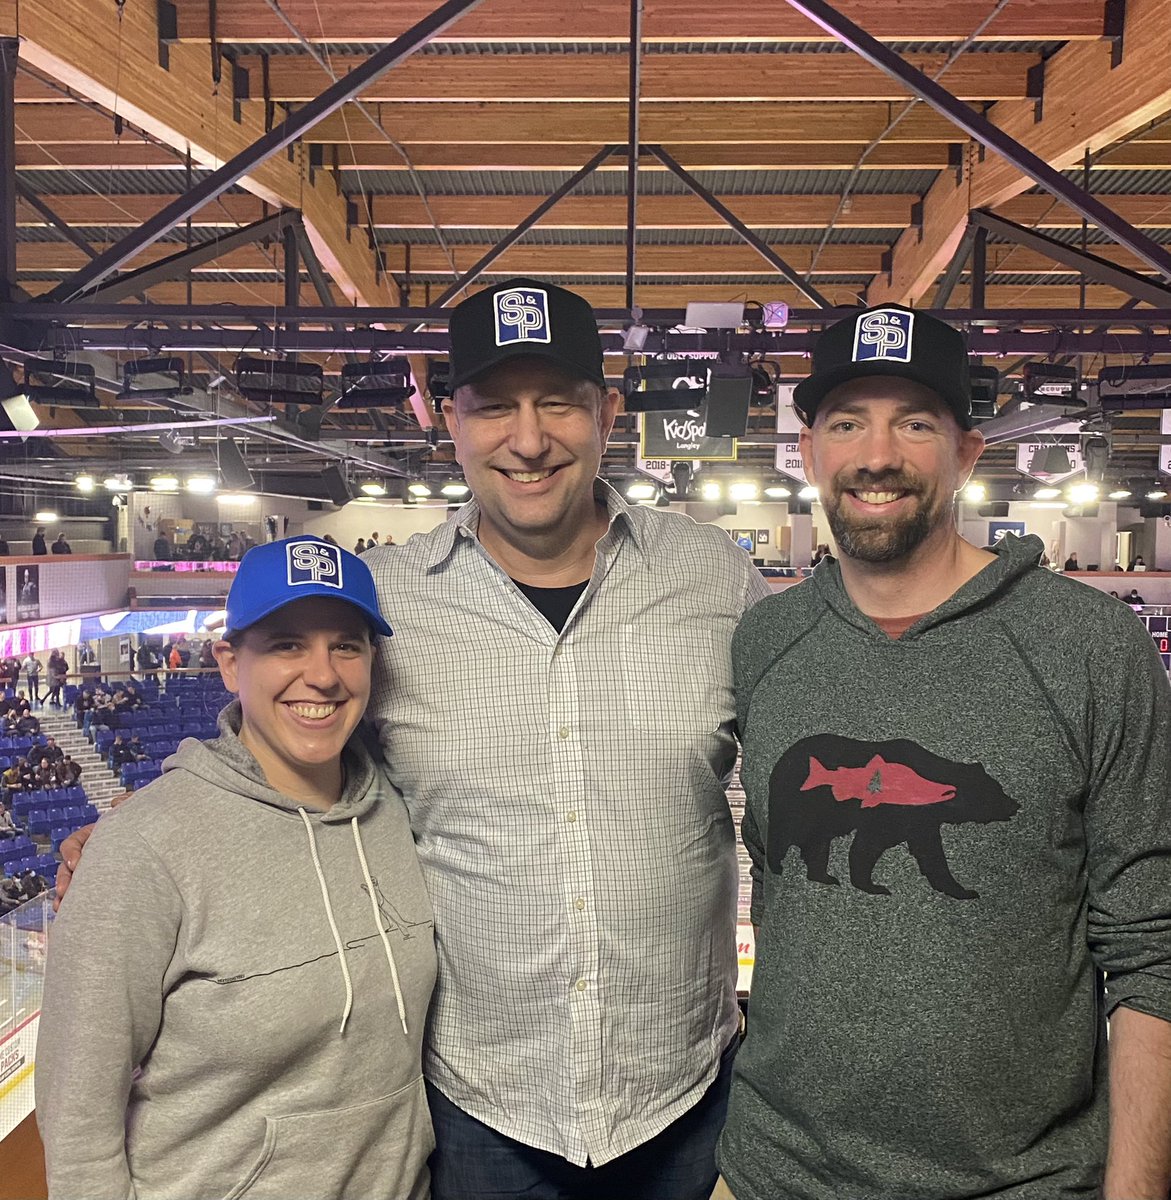 Another great couple with a brand new mortgage and 2 new great hats. And with that selection @justBlakePrice relinquishes the hat lead to @mattsekeres Im sure Matt looking on as they chose had nothing to do with it. #greatmortgage #greathats @sekeresandprice @gogoatsports